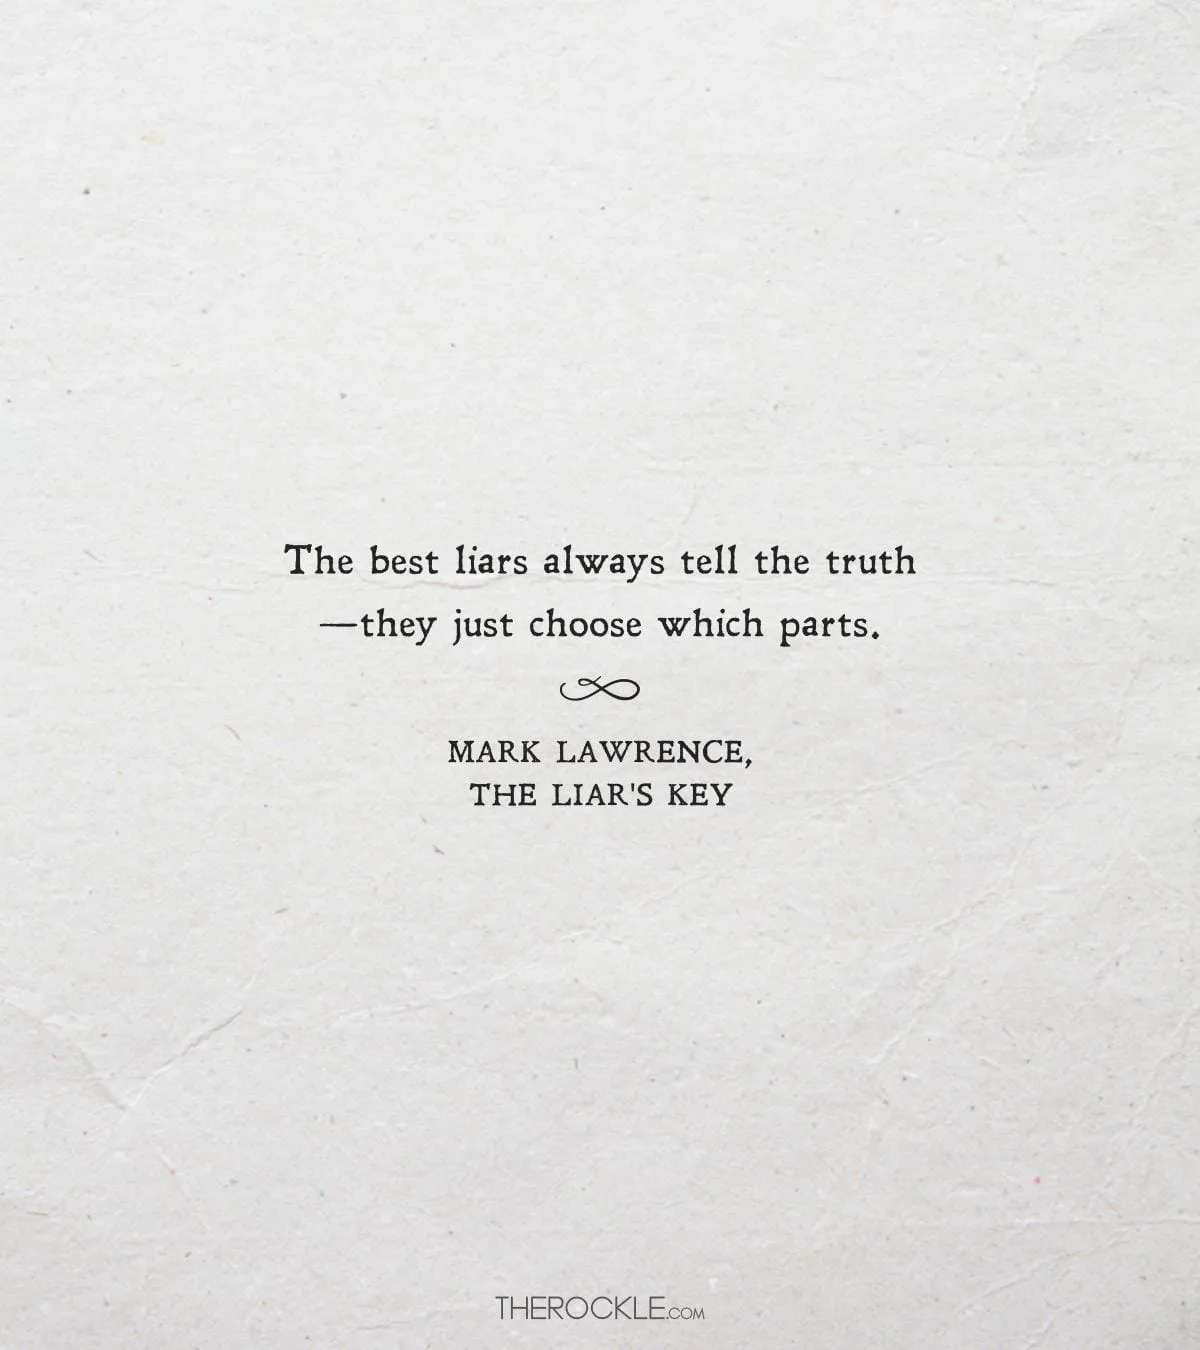 Mark Lawrence quote about liars